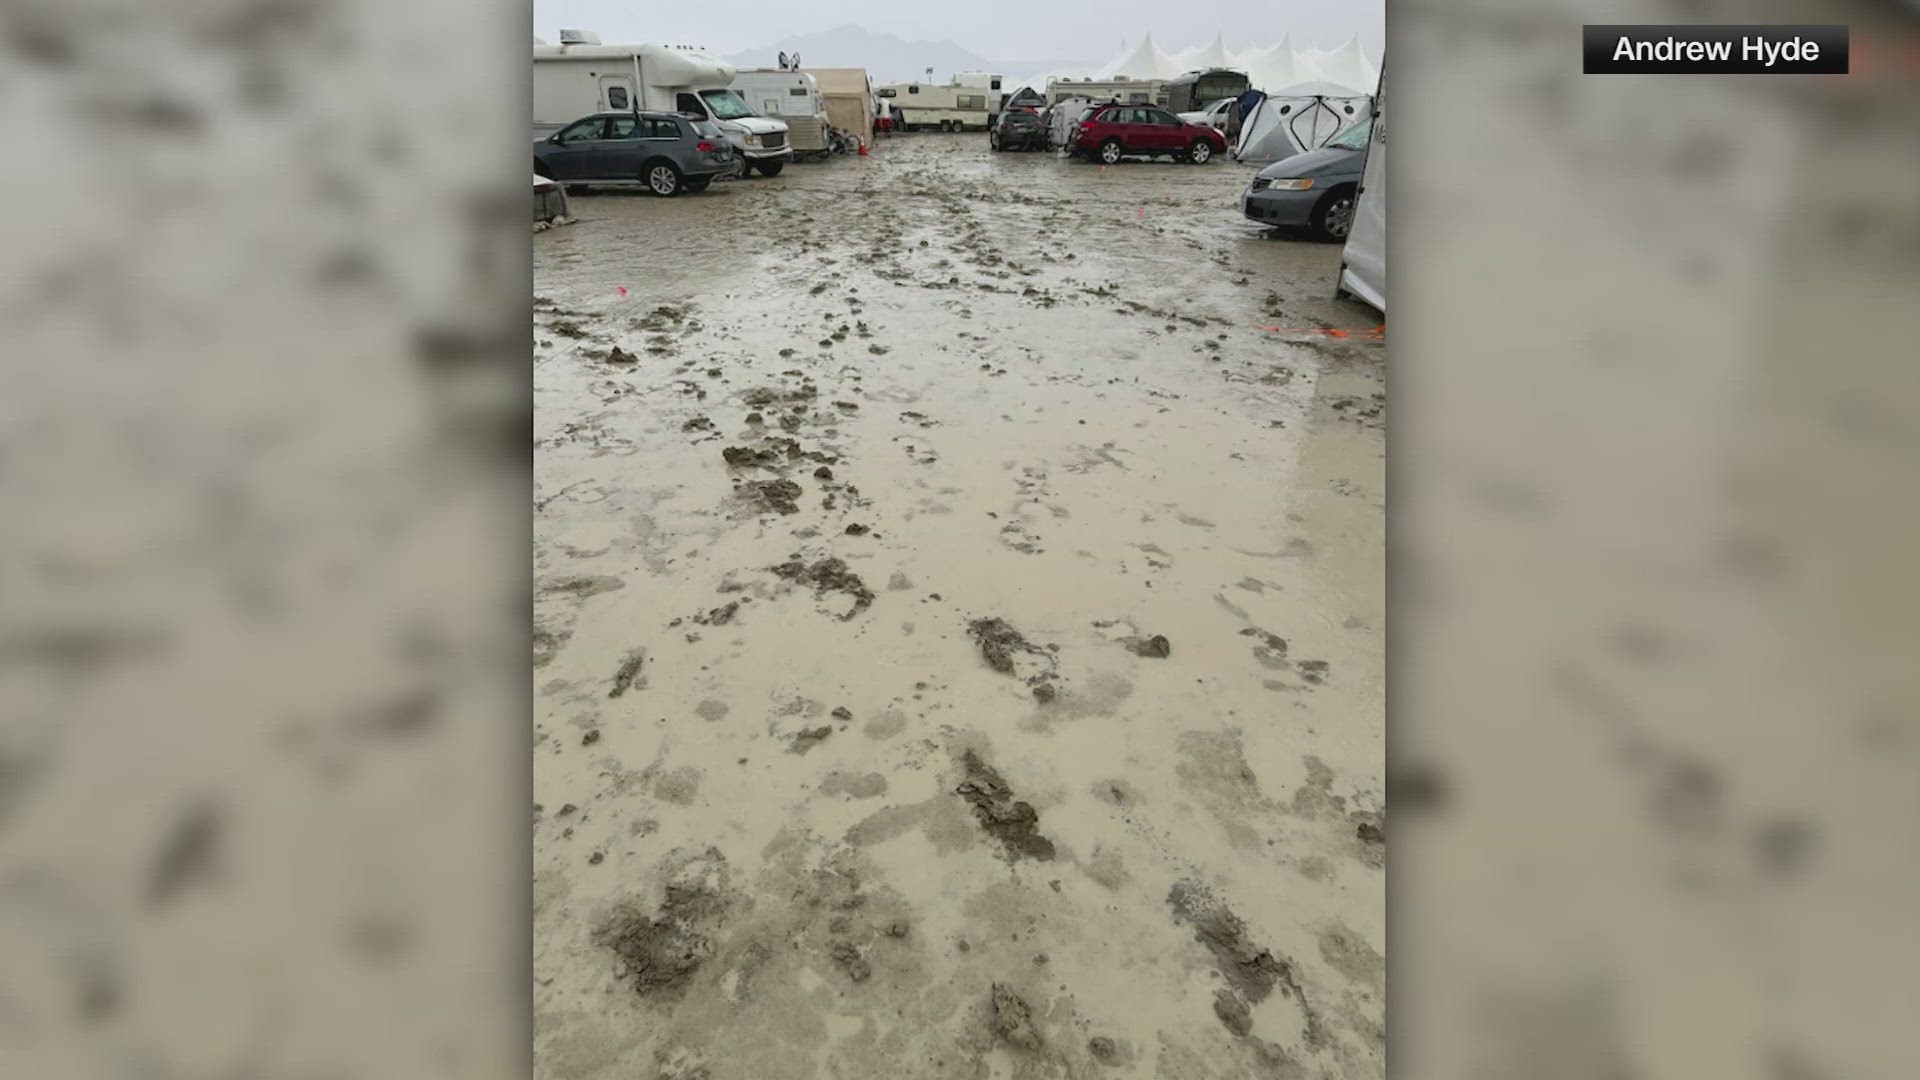 Heavy rainstorms have caused issues at the Burning Man festival in the Nevada desert.